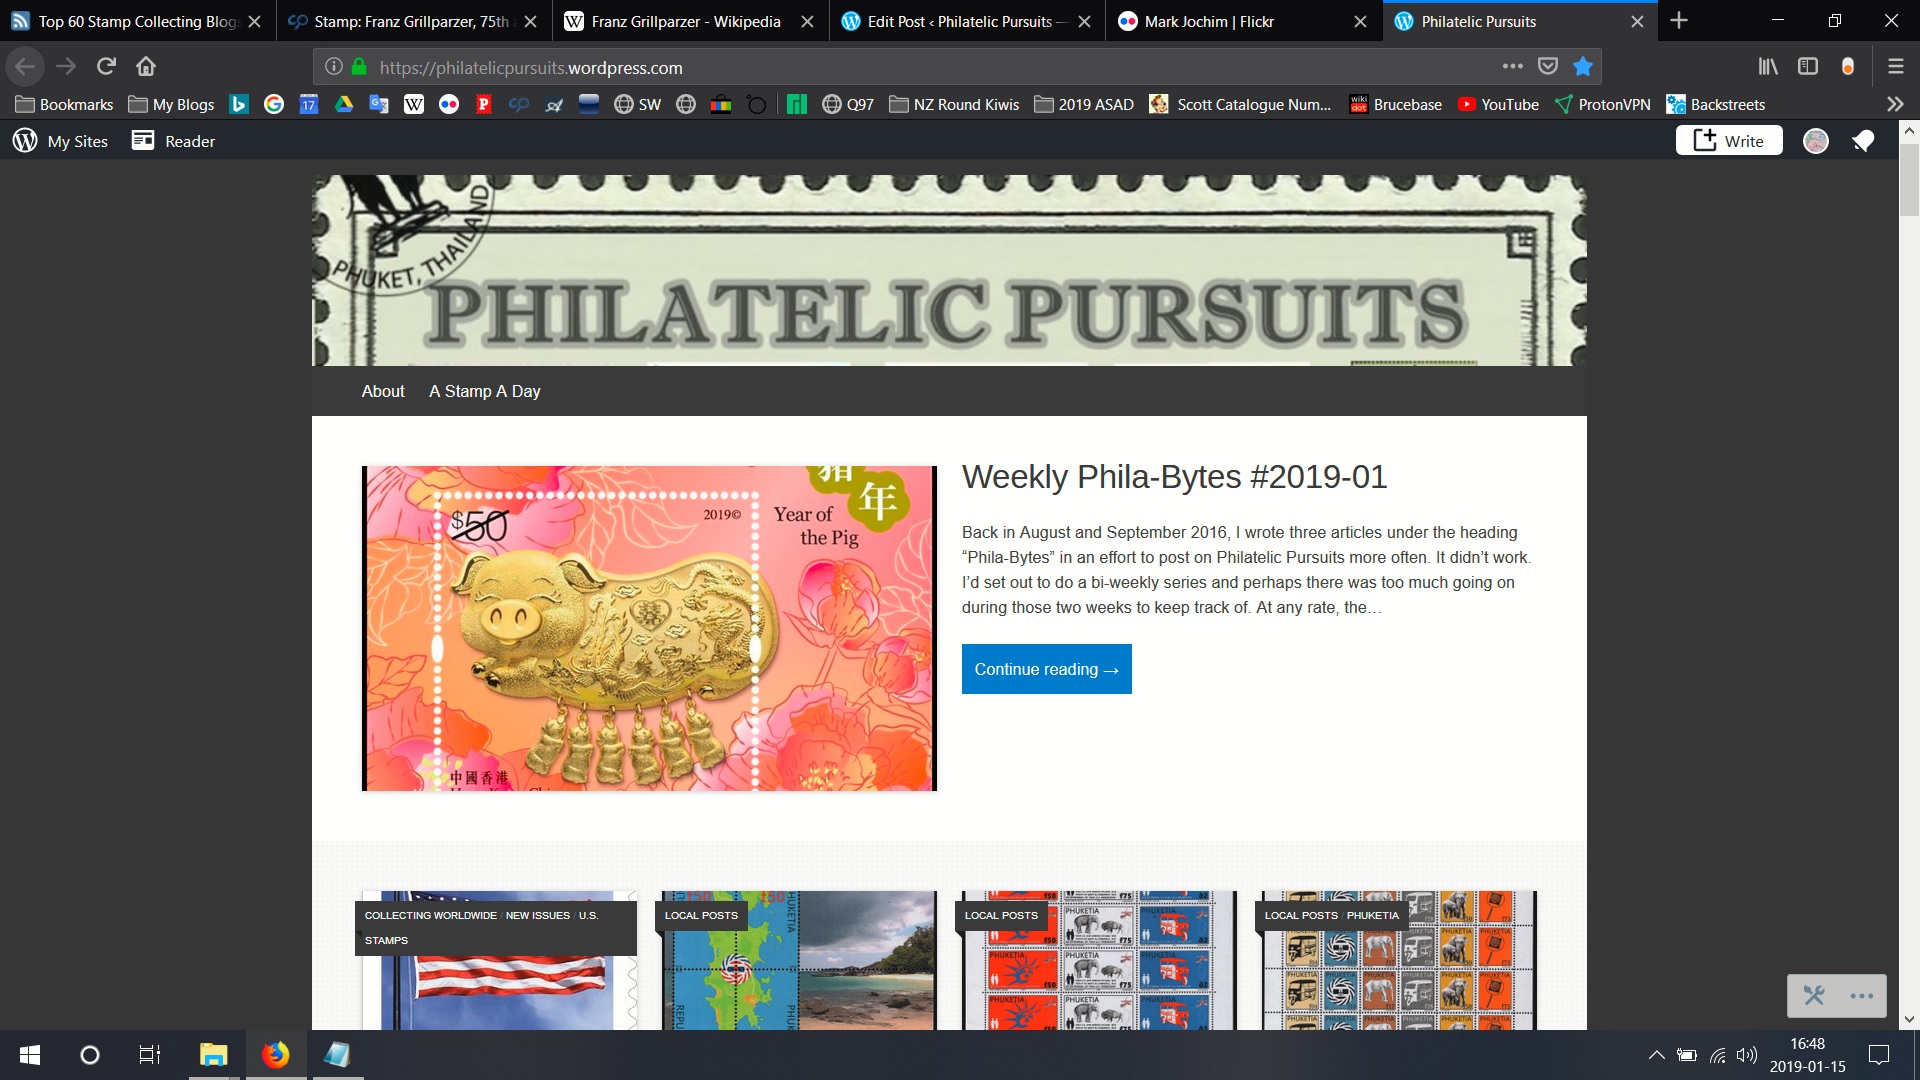 Screenshot of Philatelic Pursuits on the afternoon of January 15, 2019, using the 